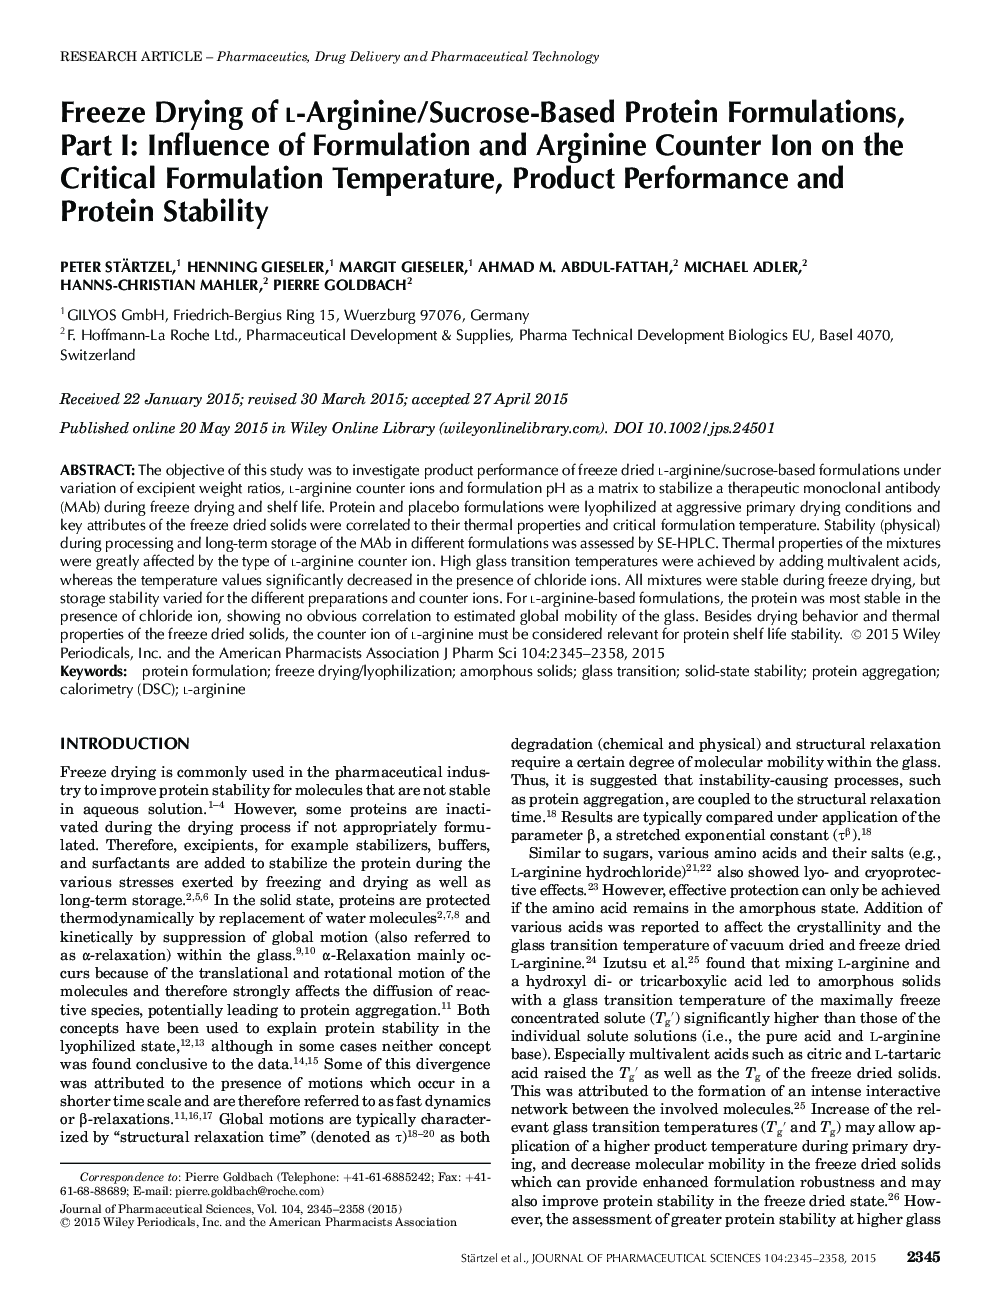 Freeze Drying of l-Arginine/Sucrose-Based Protein Formulations, Part I: Influence of Formulation and Arginine Counter Ion on the Critical Formulation Temperature, Product Performance and Protein Stability